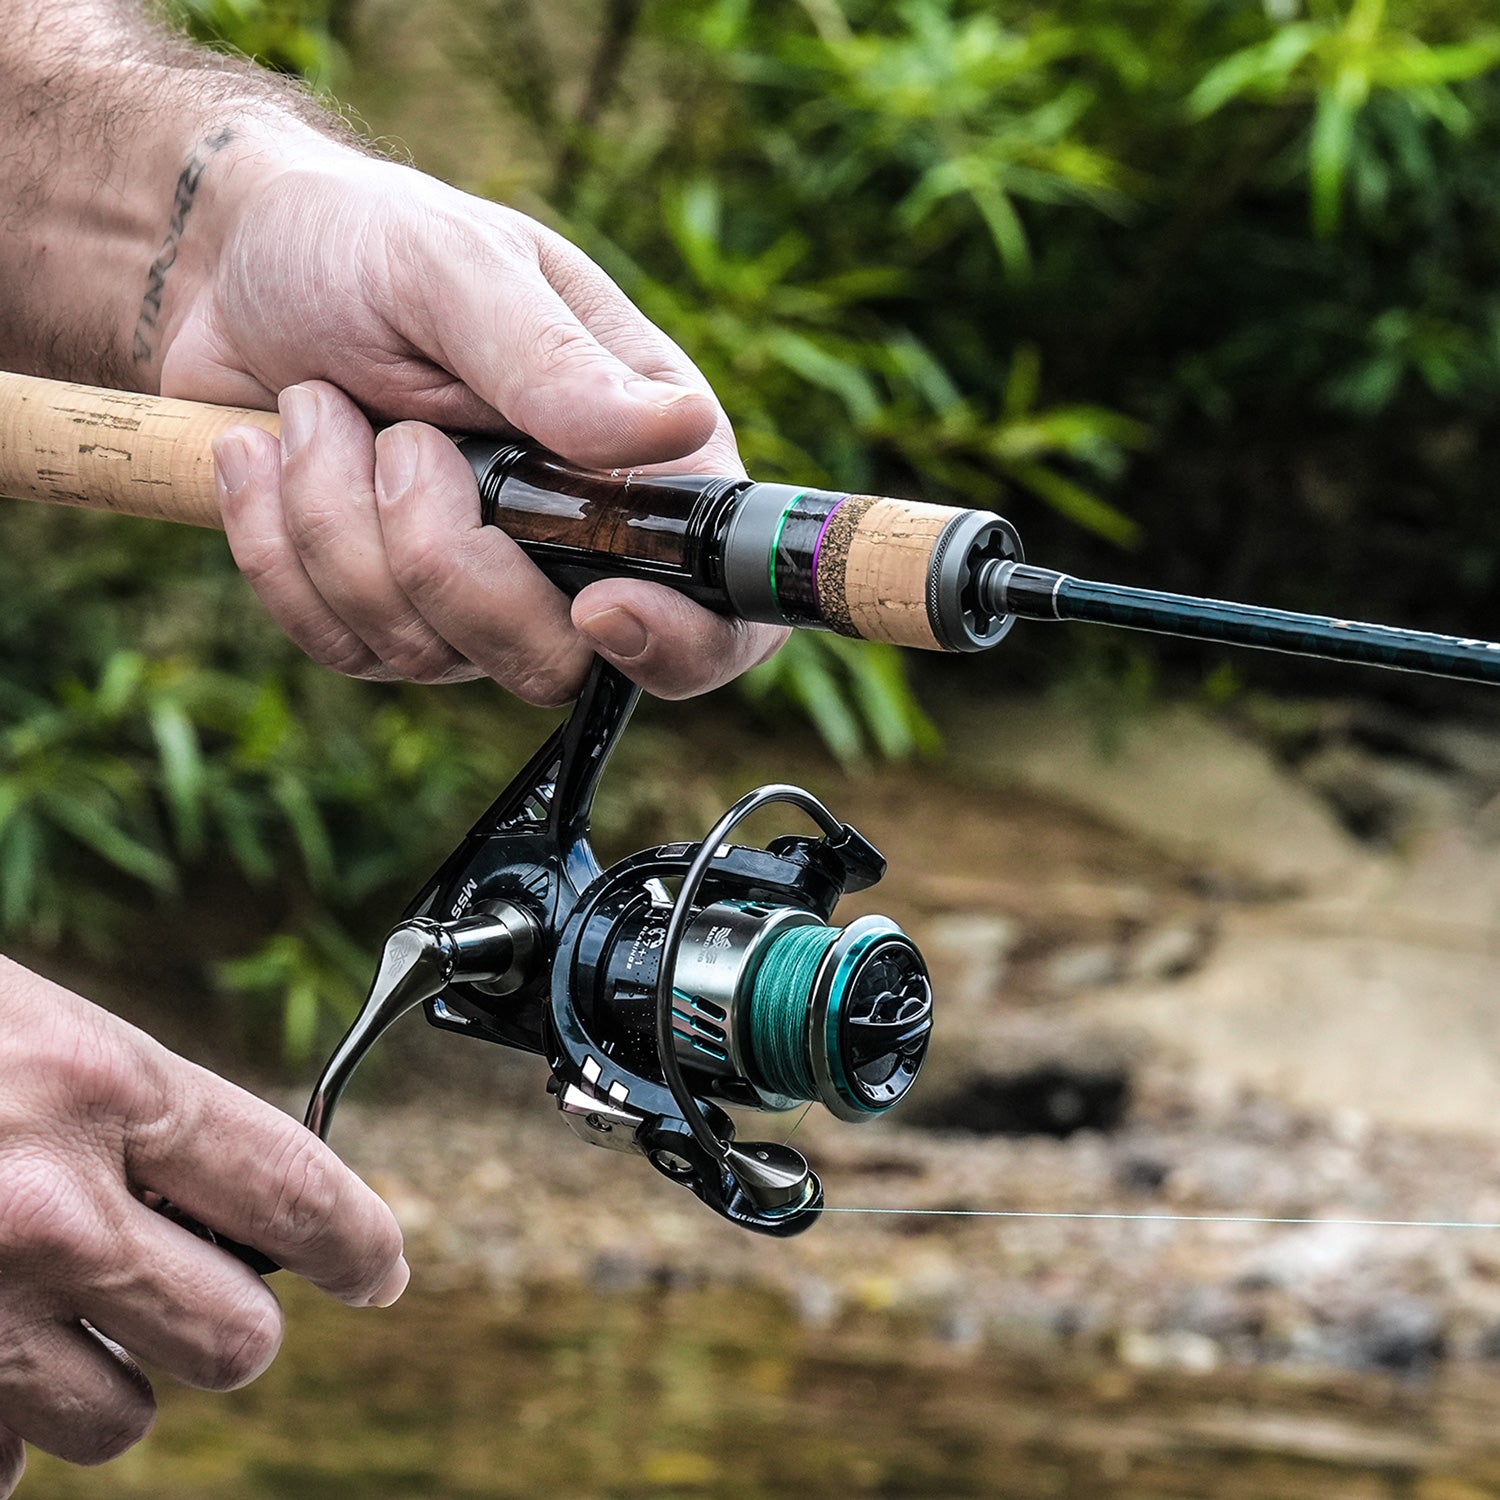 HANDING Magic L Ultra-Light two pieces spinning fishing rod is comfortable in use